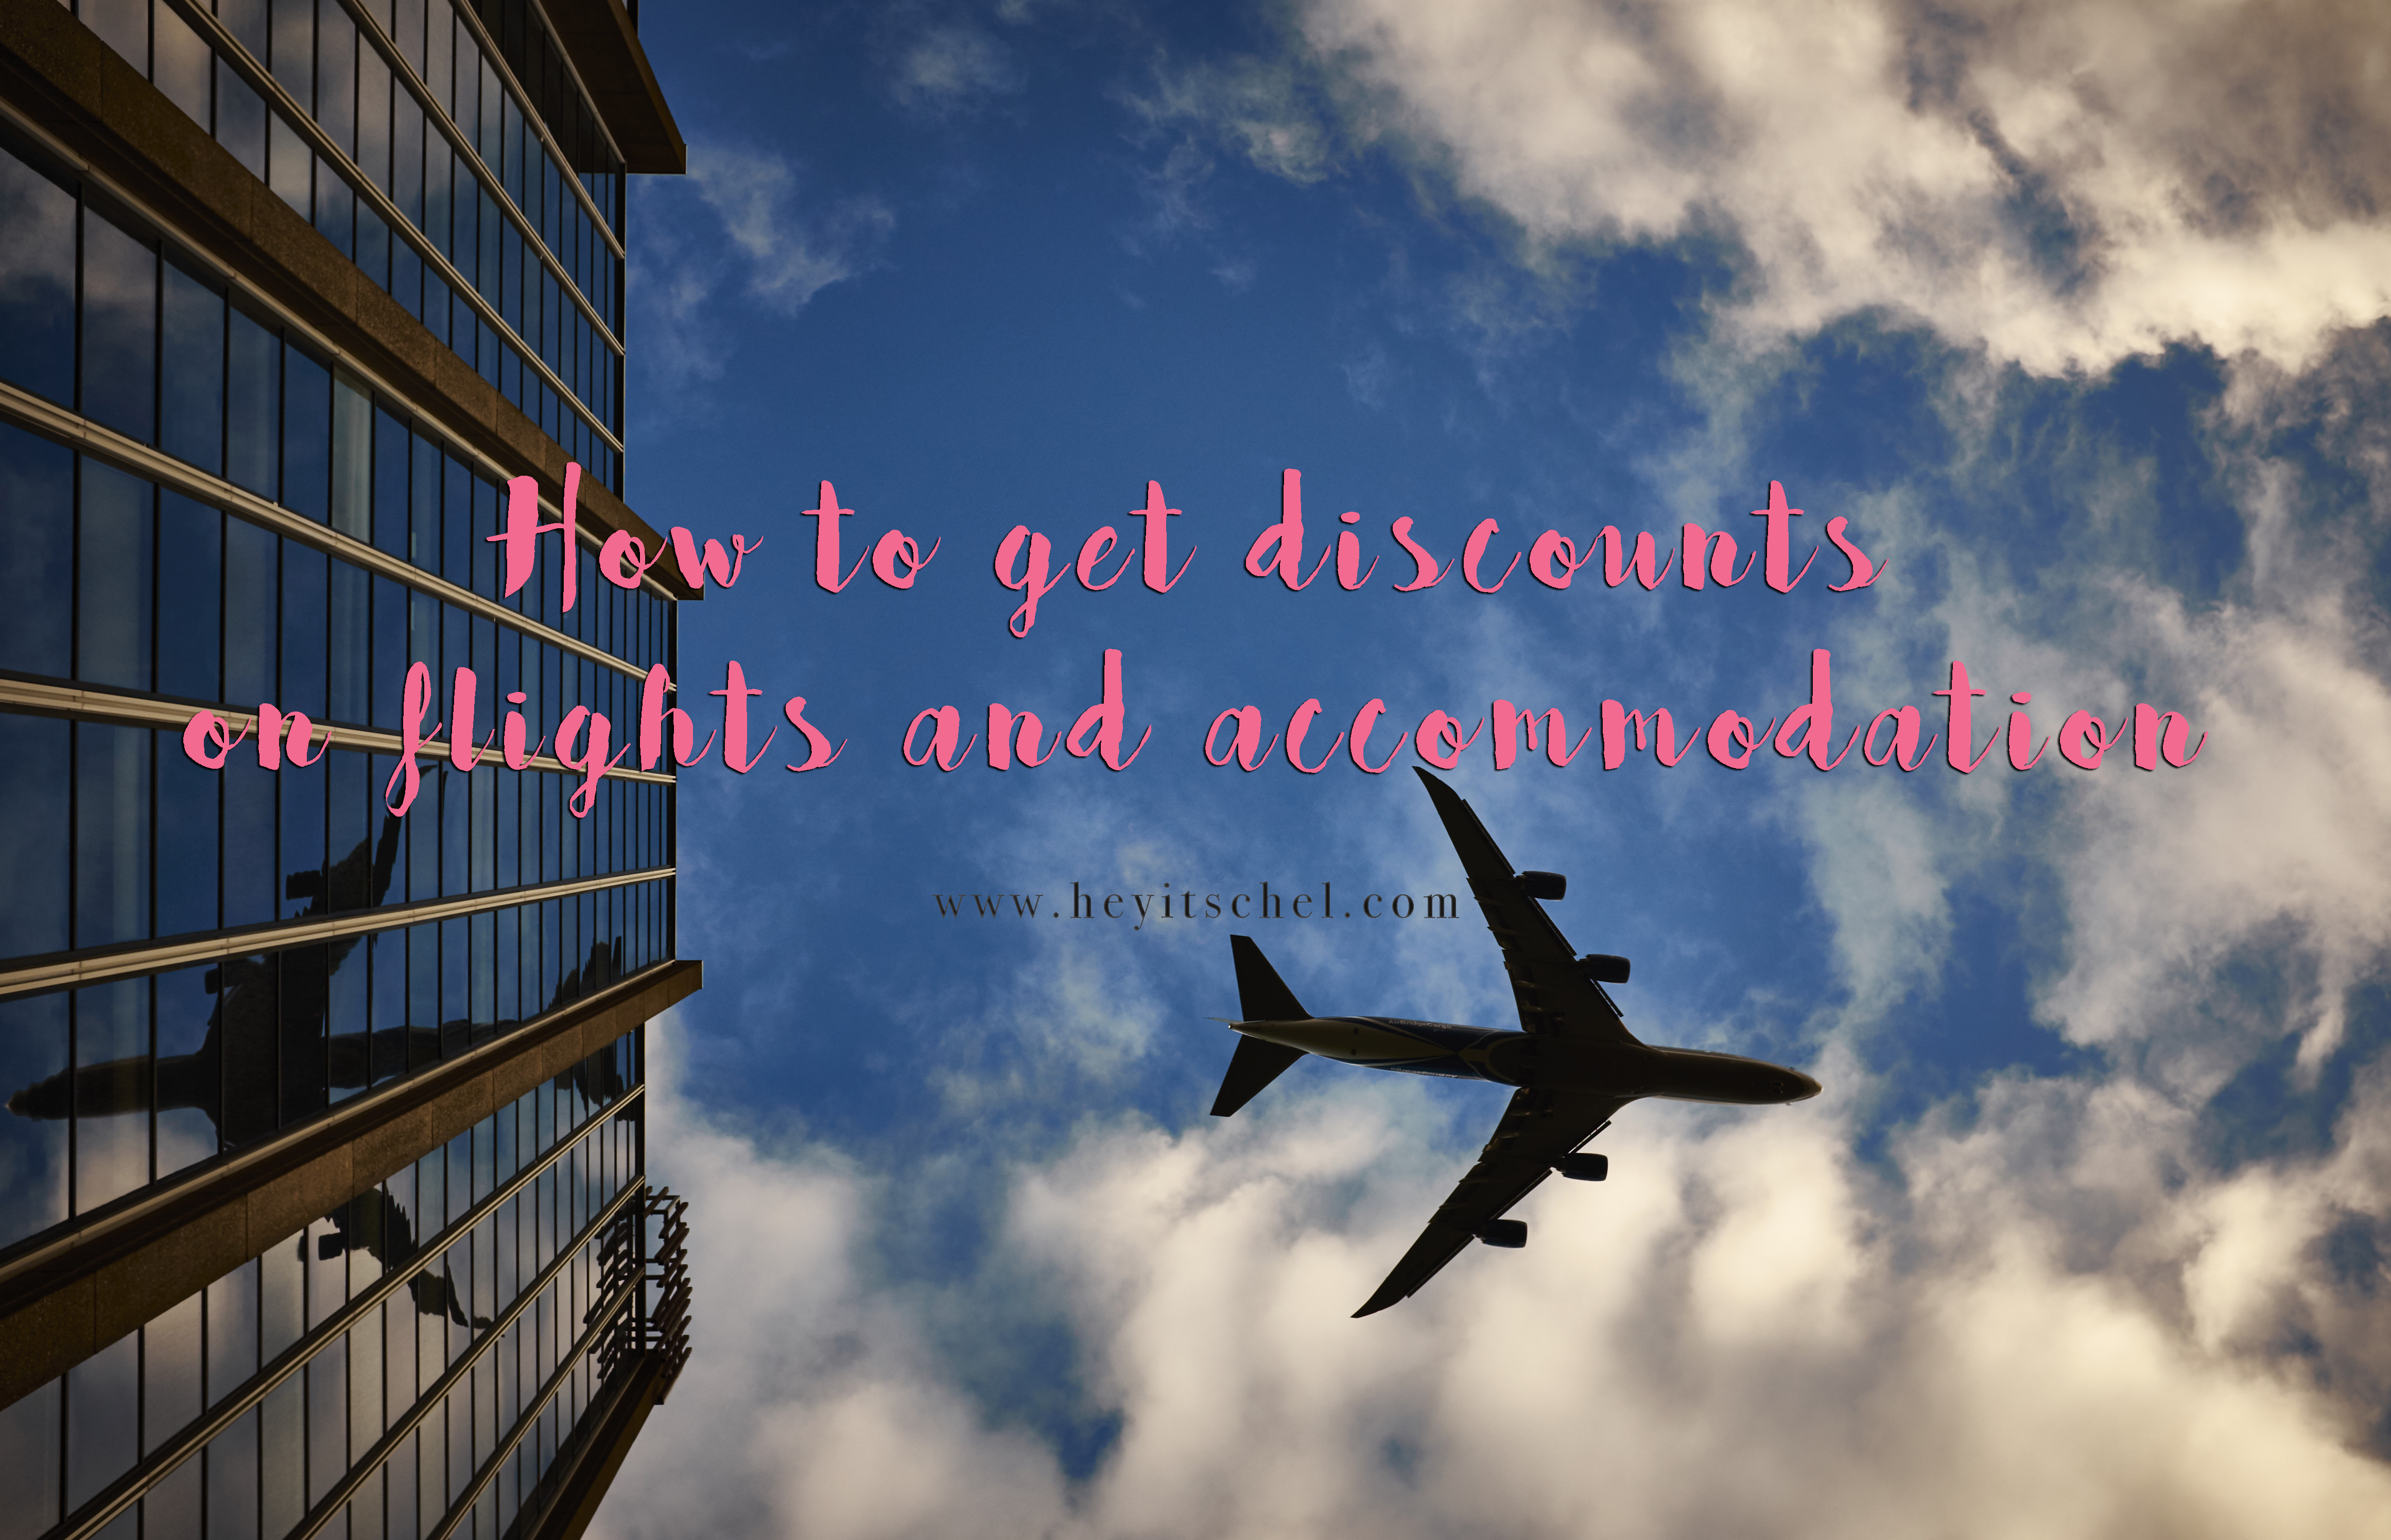 How to get discounts on flights and accommodation